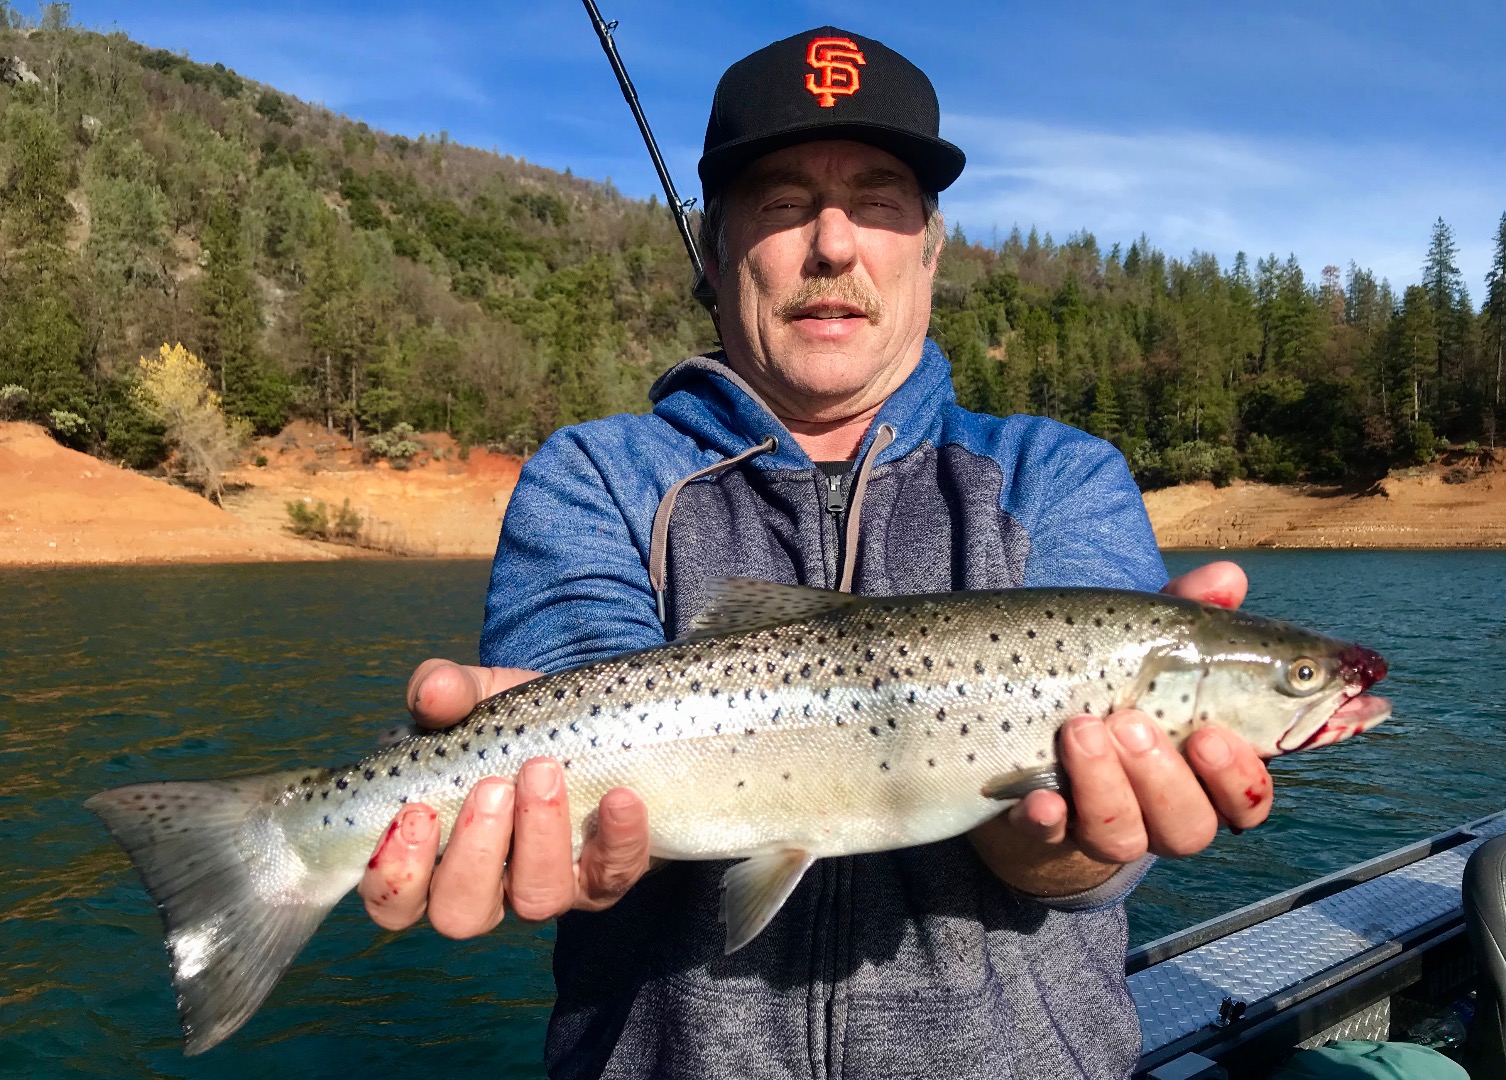 Covering lots of water for Shasta Lake trout.